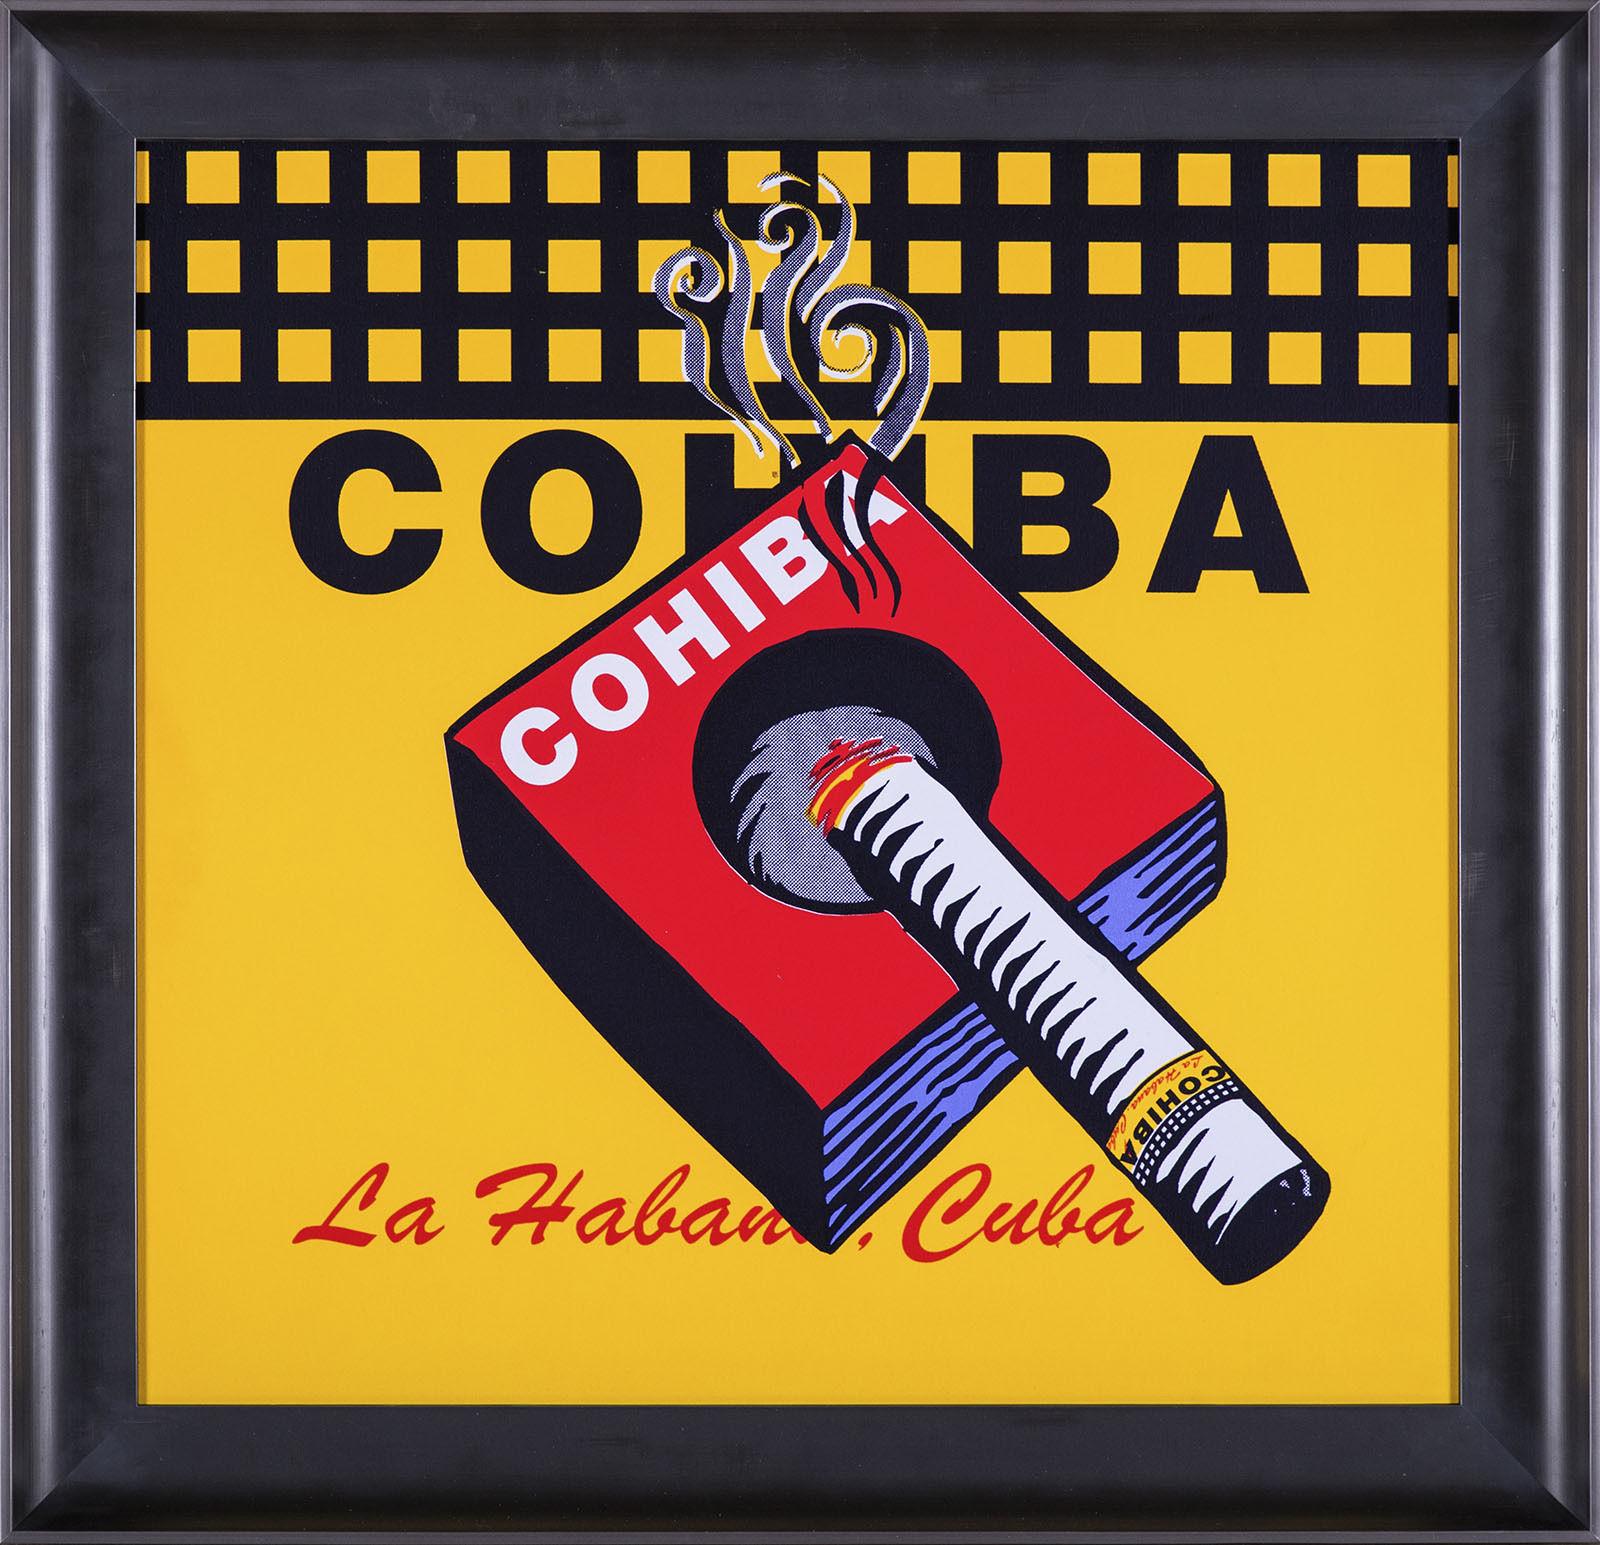 Artist: Steve Kaufman
Title: Cohiba
Size 30 X 29
Medium: Original Oil Painting on Screen print Canvas


 
The condition of the piece is mint.  We used to mount these on stretcher bars and frame.  Recently we have come up with a much better option